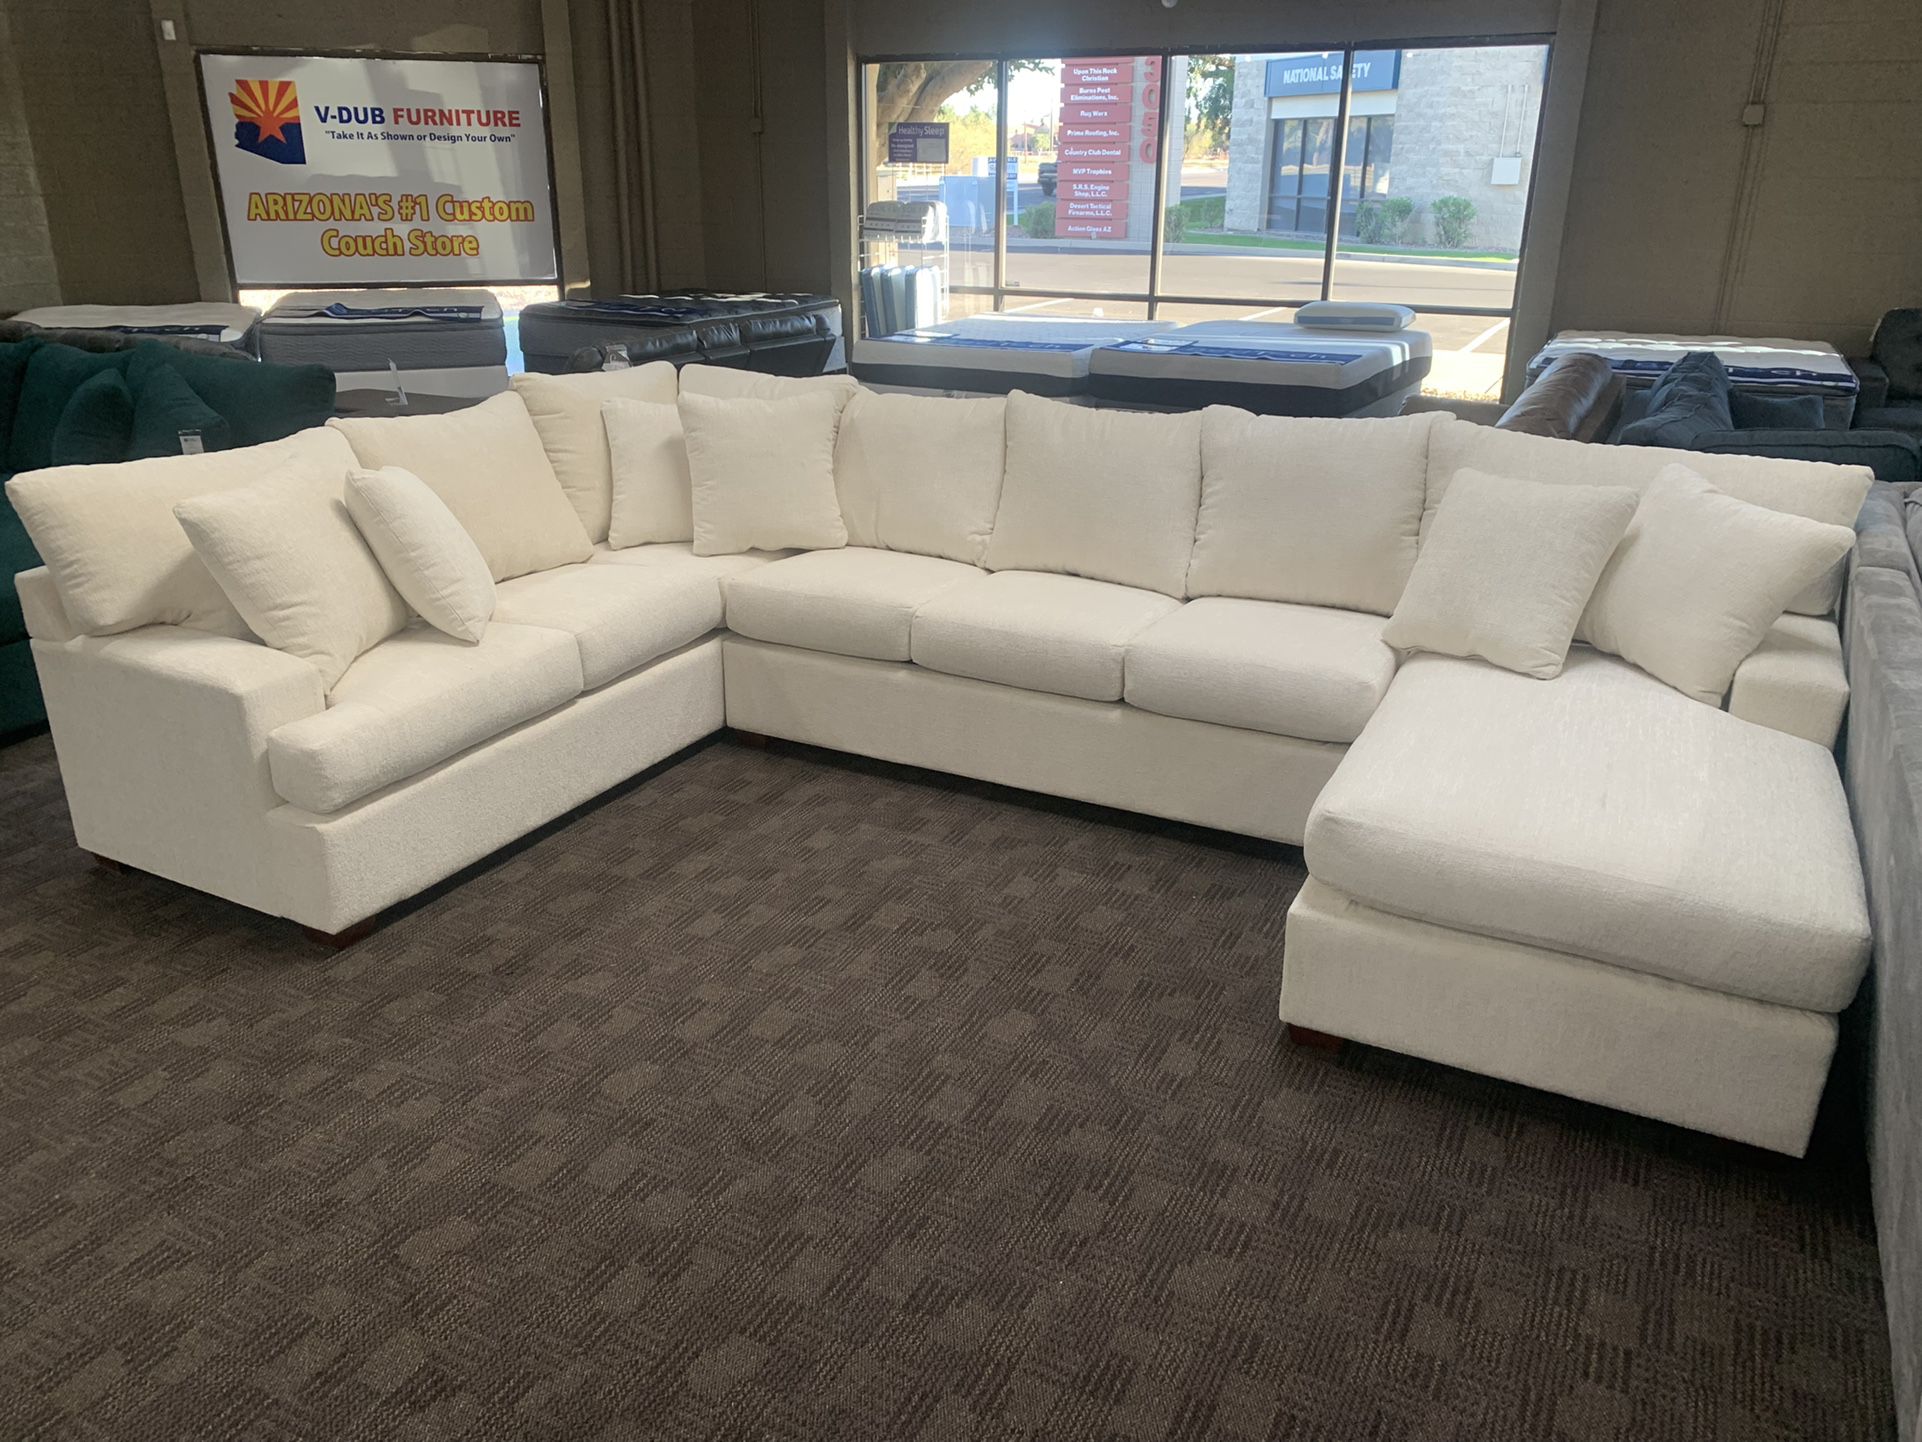 Large New White Cream Soft Sectional 